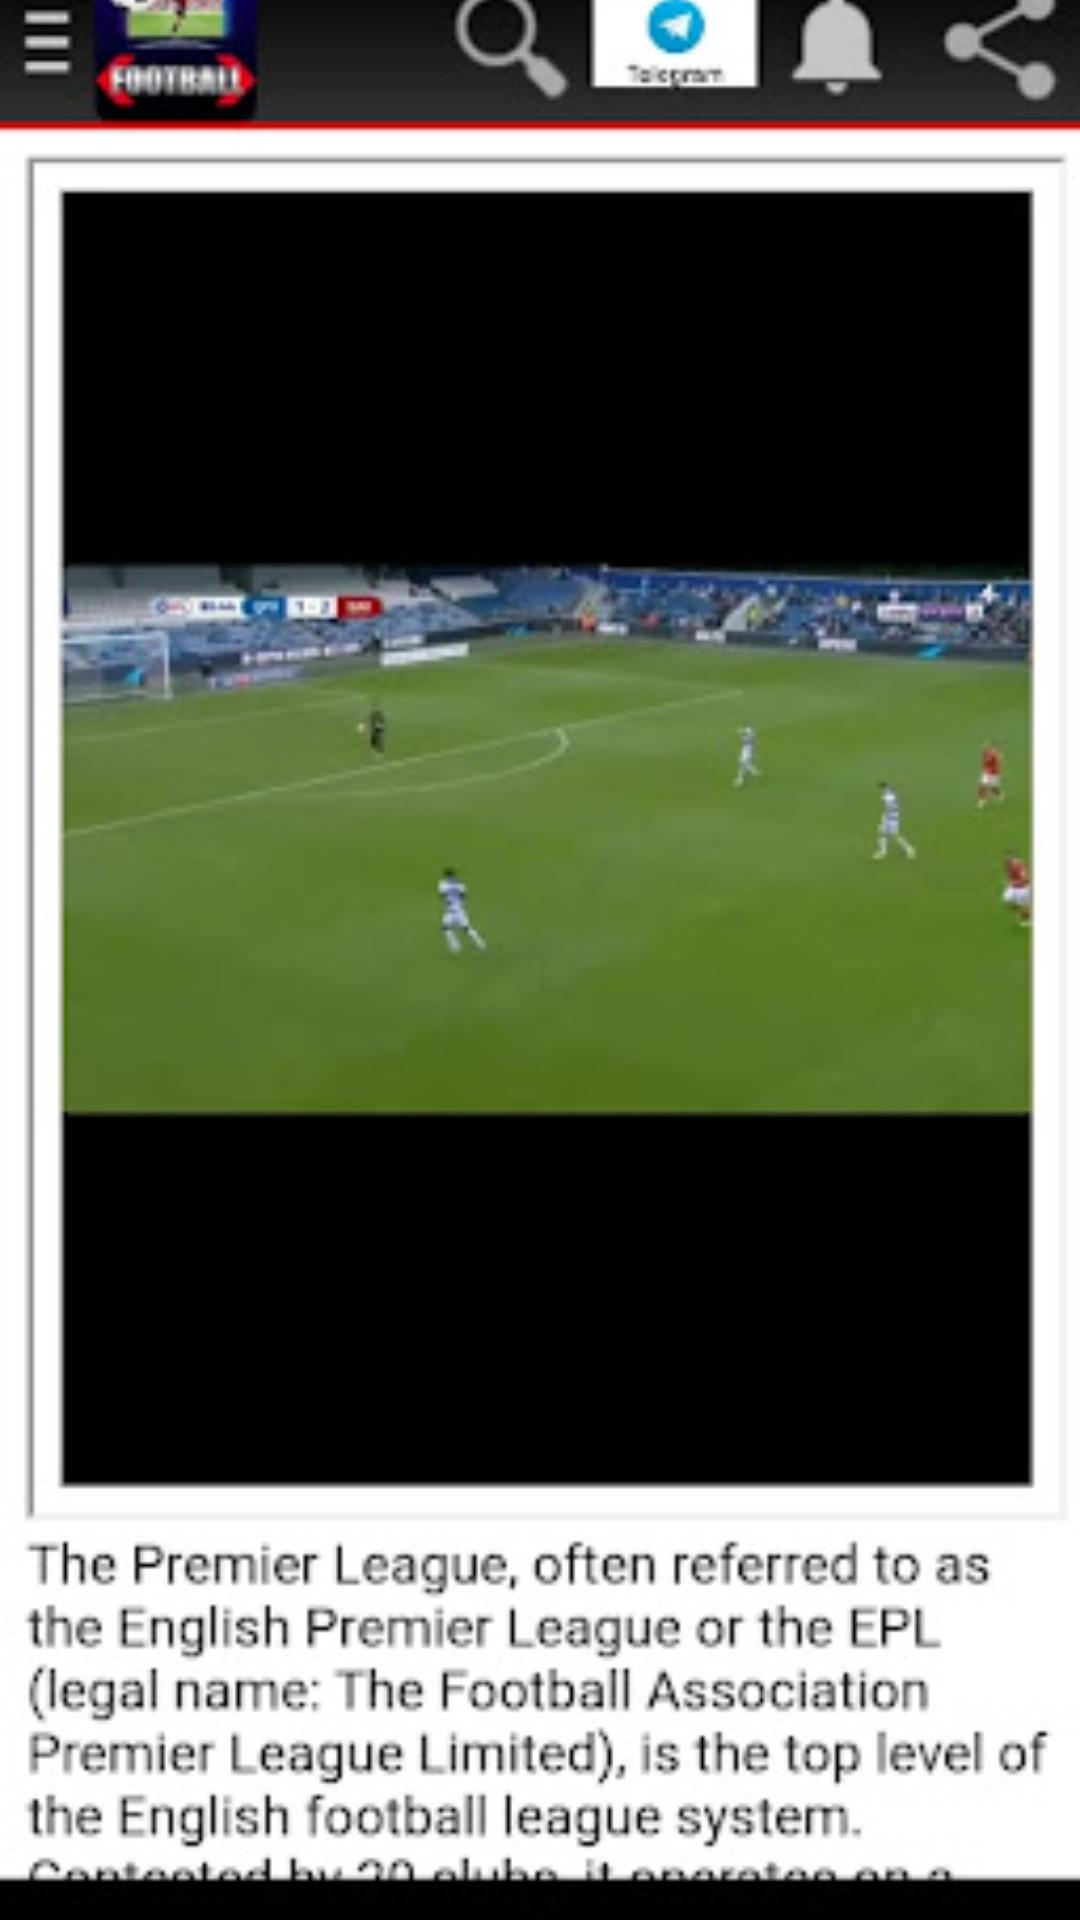 Live Football Tv - Live Football Streaming App HD for Android - APK Download